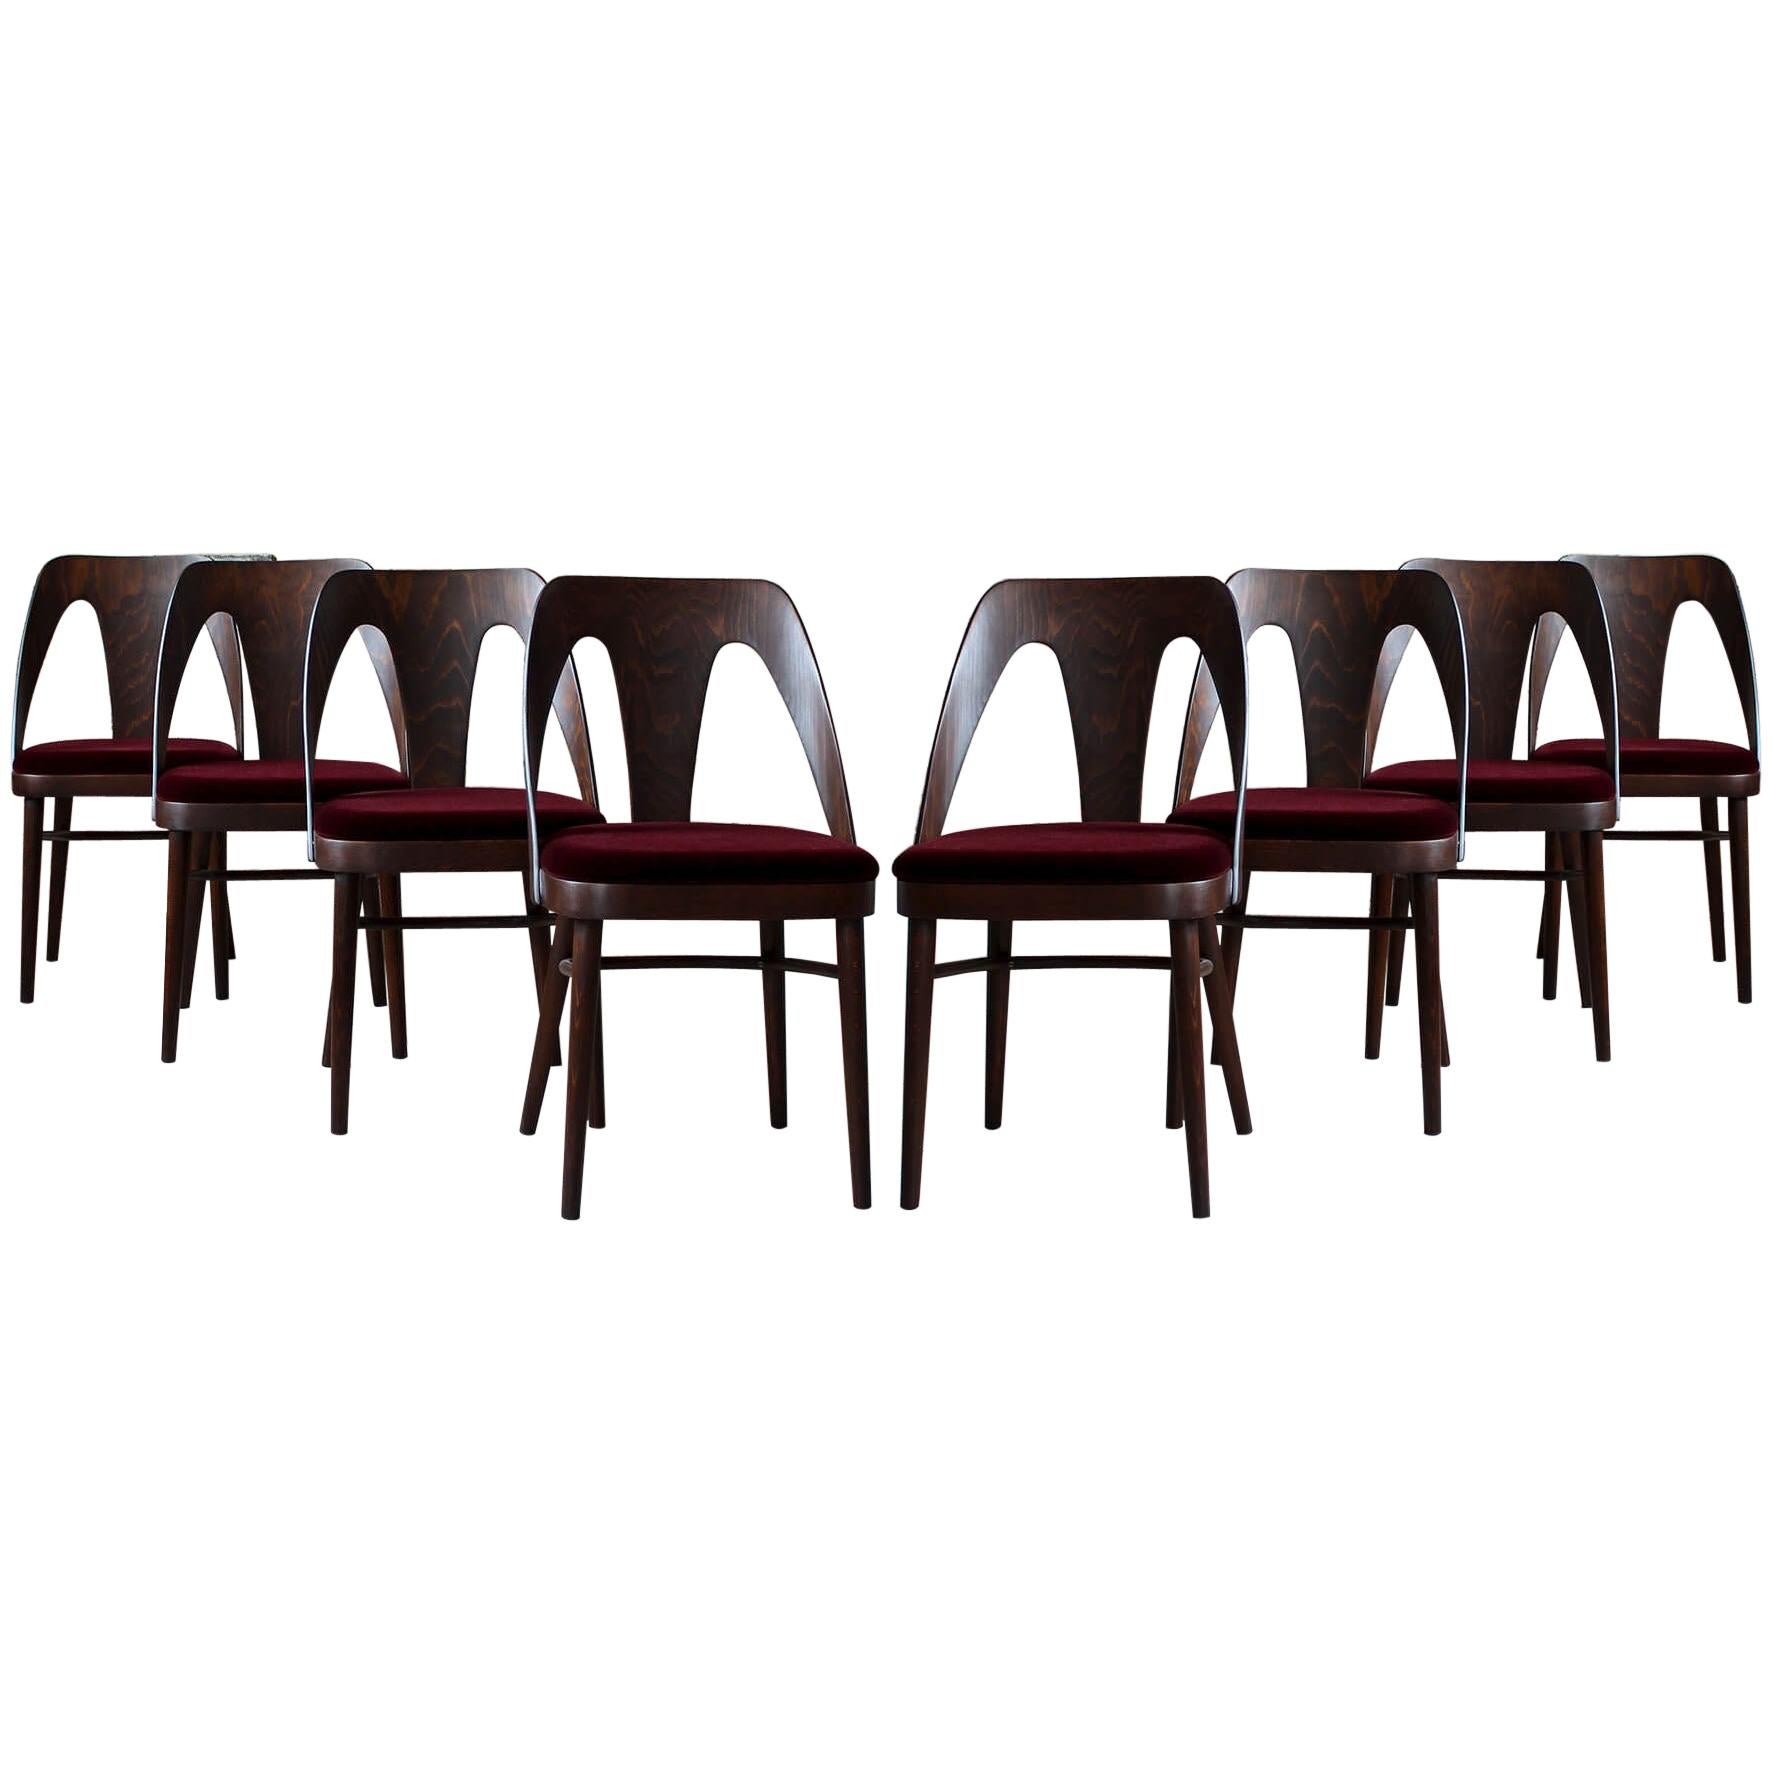 Set of 8 Midcentury Dining Chairs in Burgundy Mohair by Kvadrat